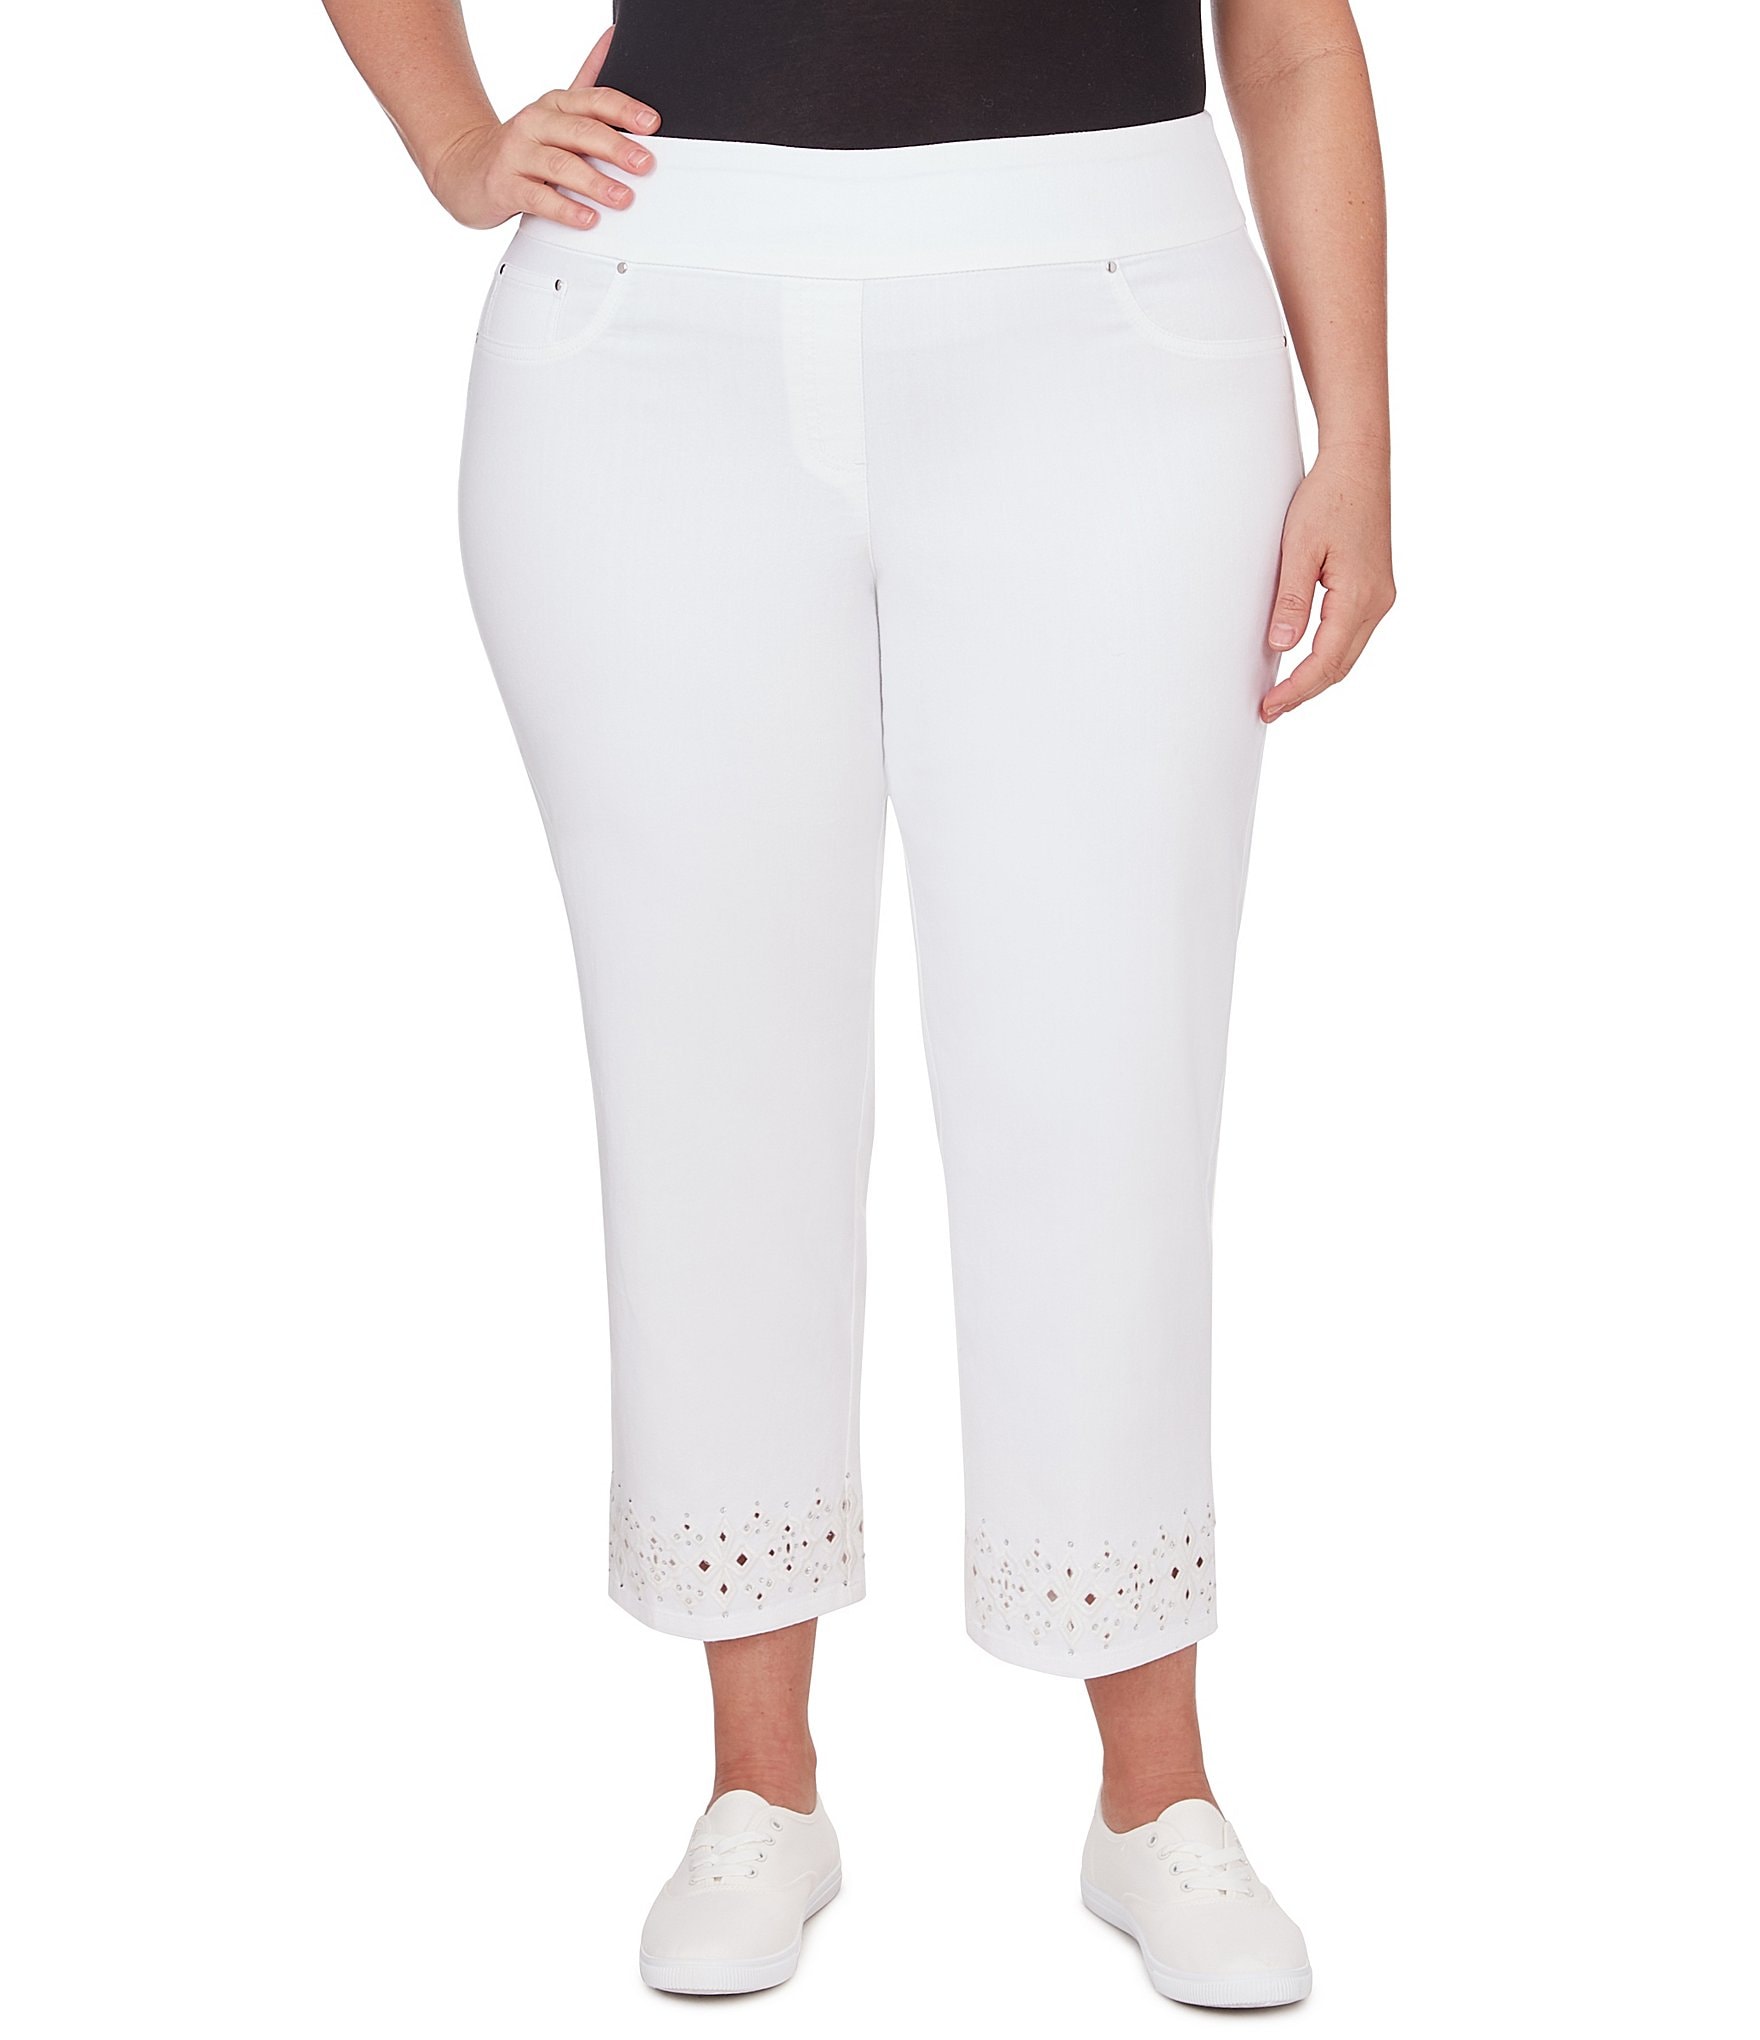 Silver Jeans Co. Plus Size Avery Mid-Rise Rolled Hem Curvy Fit Capri Jeans